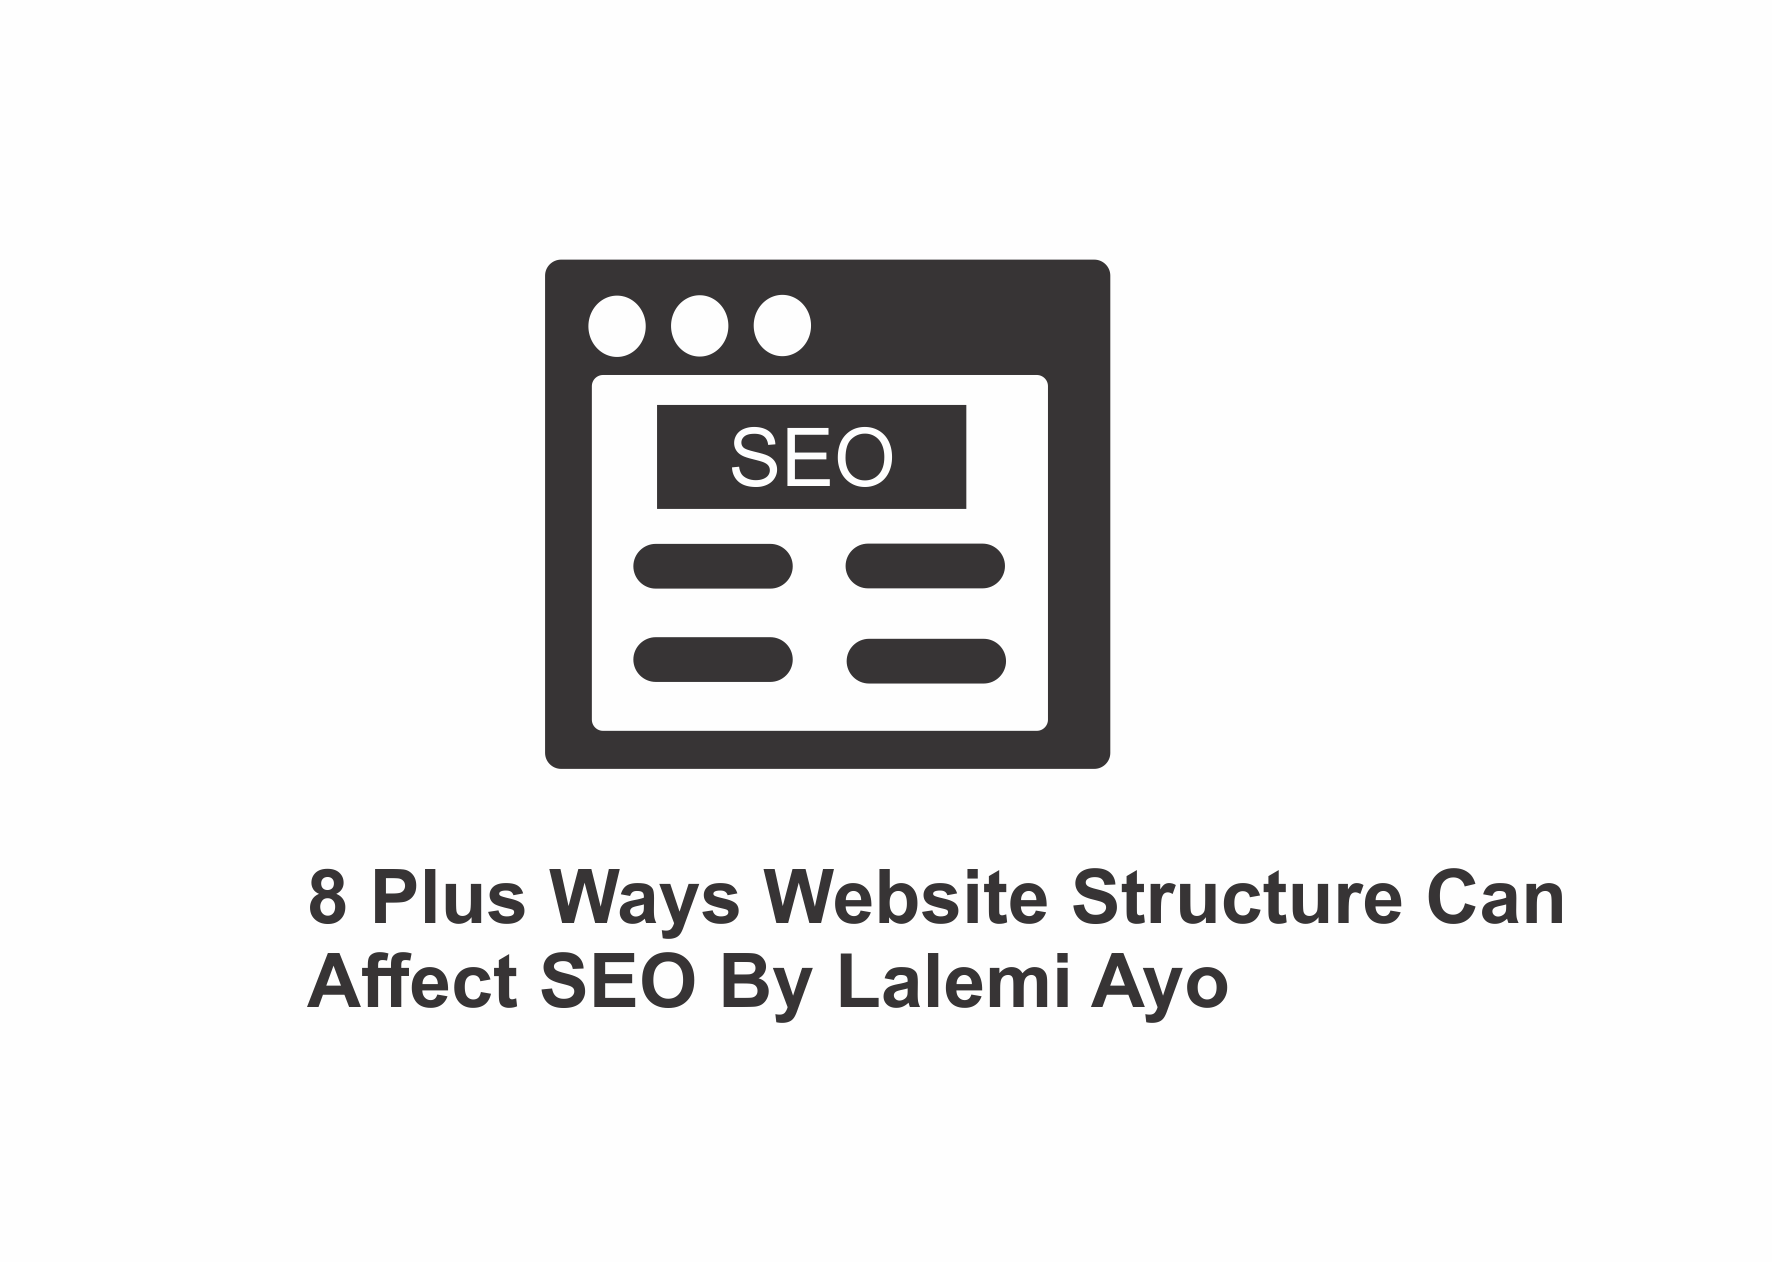 8 Plus Ways Website Structure Can Affect SEO